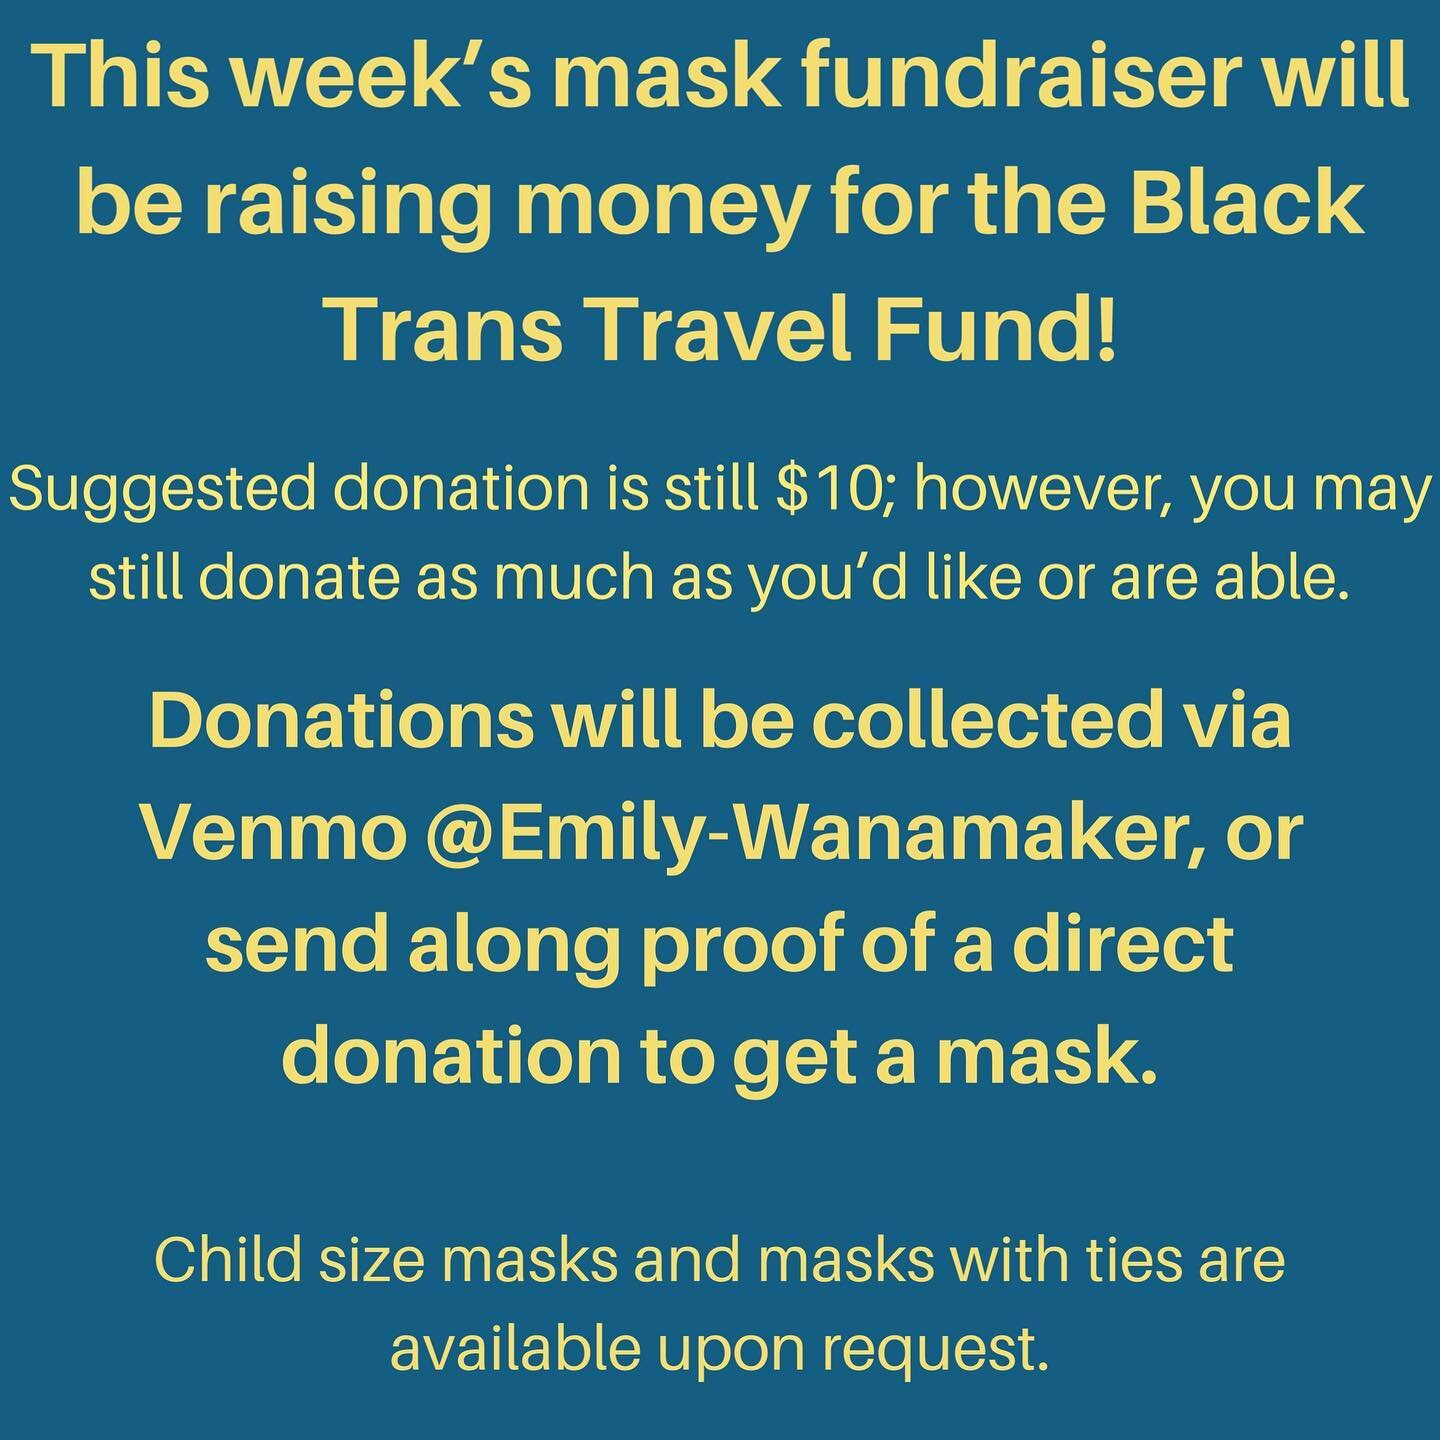 Hey everybody! Last week, we raised $50 for the Philly Bail Fund (proof of donation in final pic)! This week, I will be selling masks to raise money for the Black Trans Travel Fund - their website is linked in my bio for more info. Suggested donation